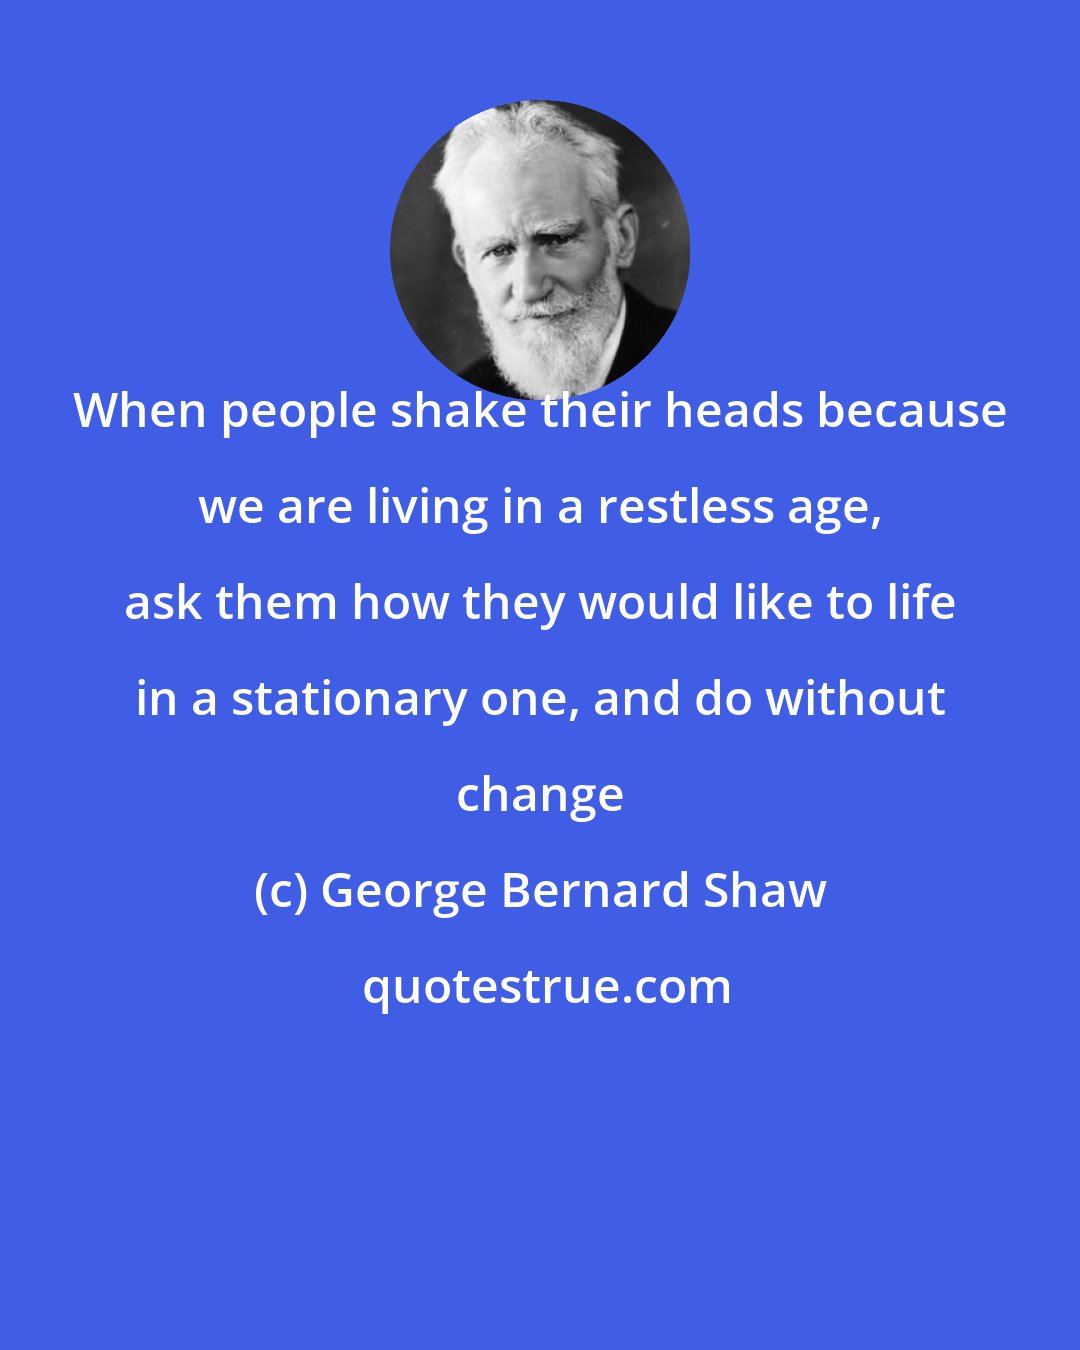 George Bernard Shaw: When people shake their heads because we are living in a restless age, ask them how they would like to life in a stationary one, and do without change